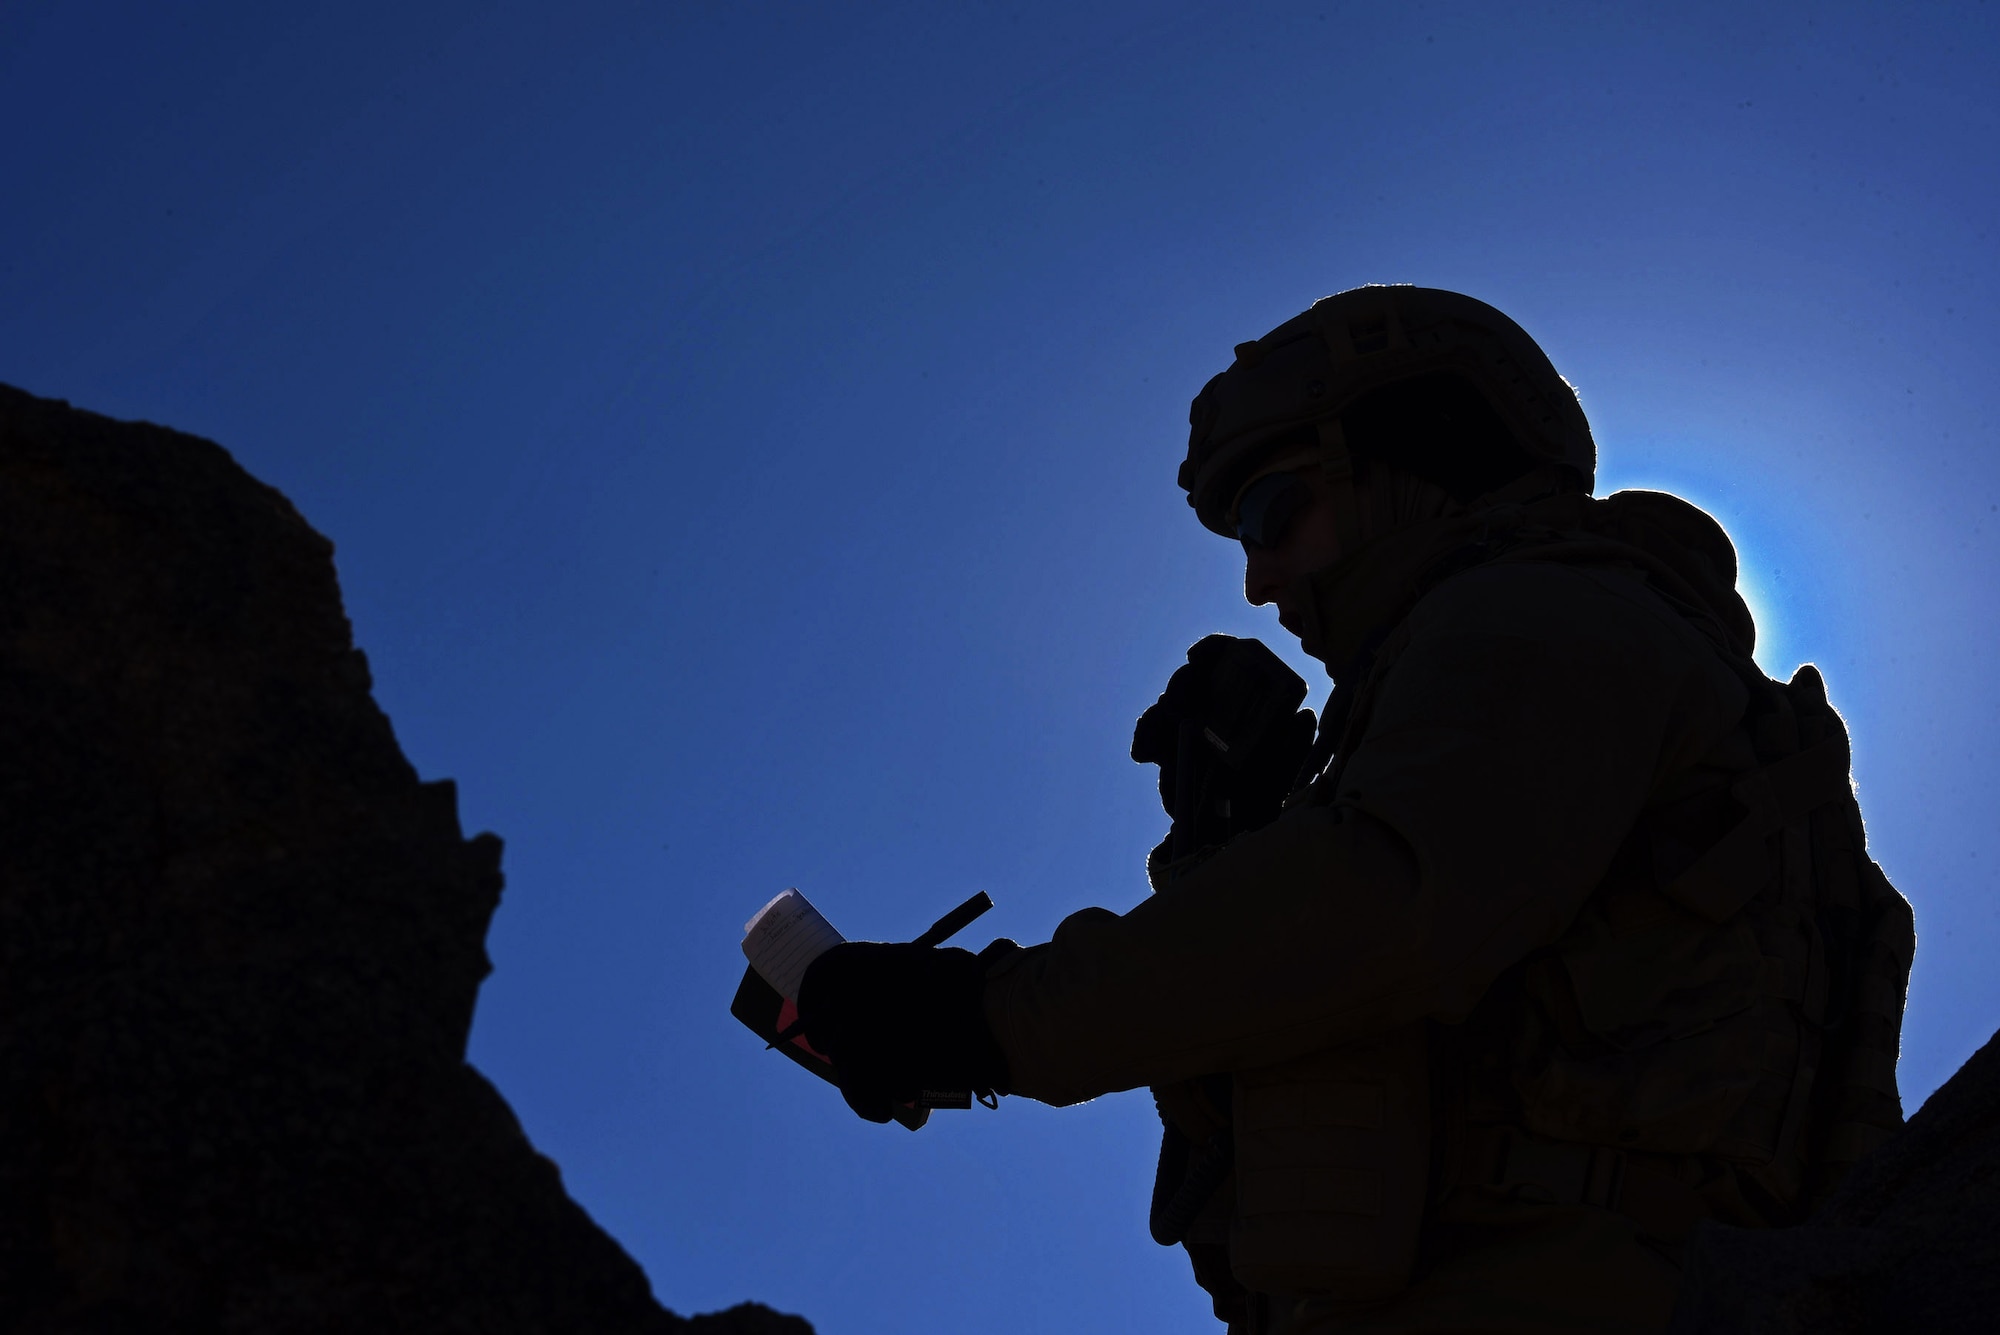 Senior Airman Joseph Schwartz, 14th Air Support Operations Squadron Joint Terminal Attack Controller, communicates target locations to pilots during a close-air support exercise as part of a Ft. Irwin, Califor., National Training Center rotation, Feb. 22, 2018. During the month-long rotation, 93d Air Ground Operations Wing units embedded with approximately 4,000 soldiers in the largest force-on-force live-fire exercise in the world. The 93d AGOW provided tactical air control party support to enhance interoperability for major combat operations downrange. (U.S. Air Force photo by Senior Airman Greg Nash)